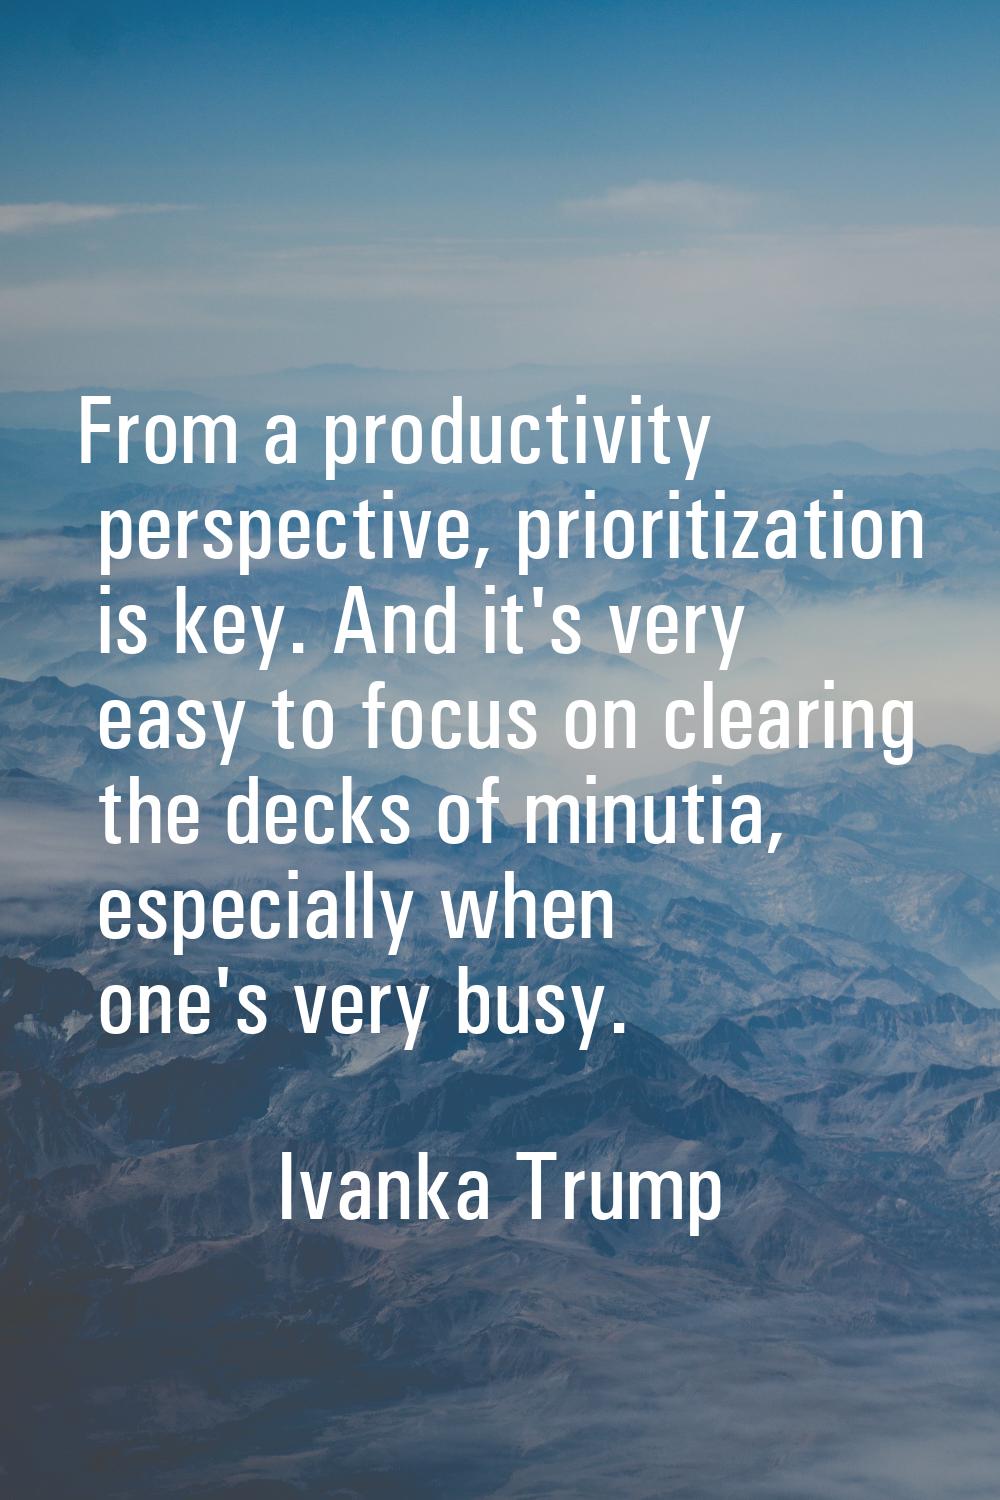 From a productivity perspective, prioritization is key. And it's very easy to focus on clearing the